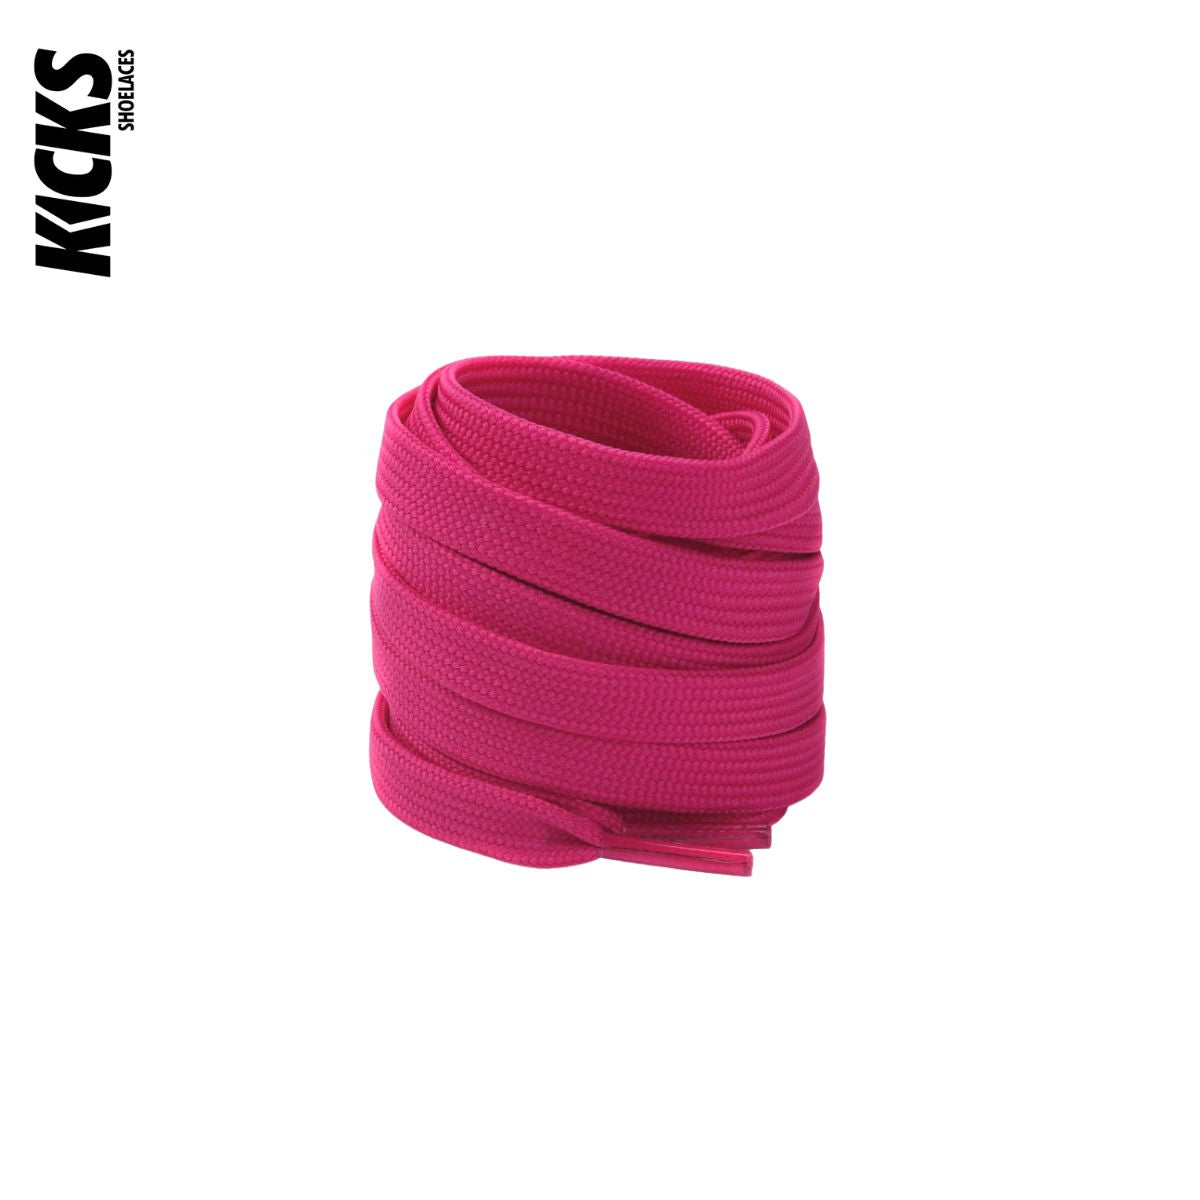 Rose Pink Nike Dunks Shoelace Replacements